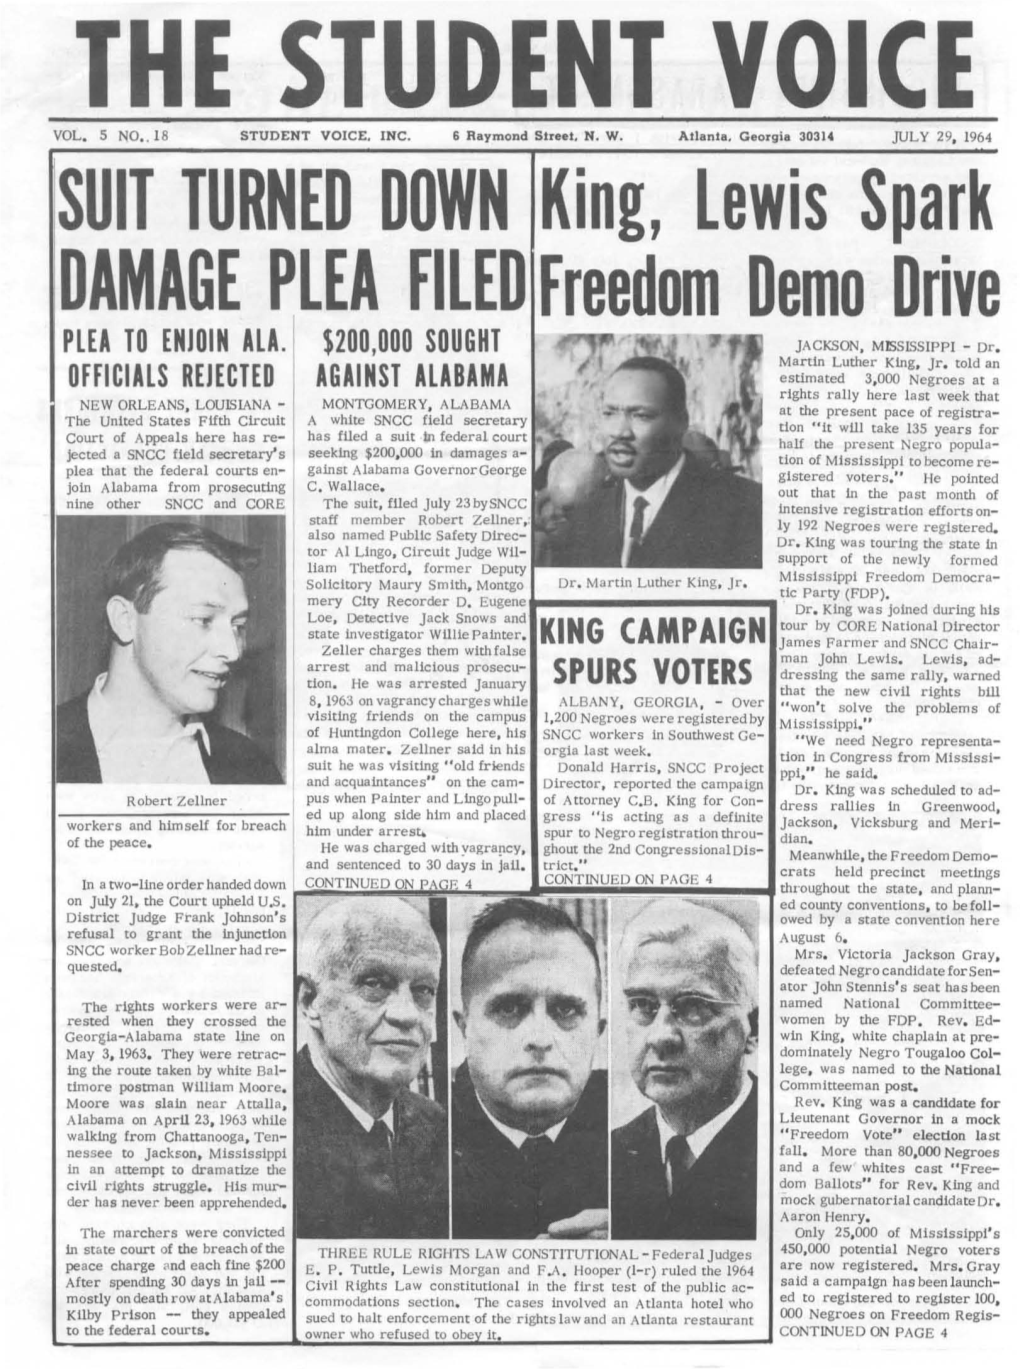 The Student Voice, July 29, 1964